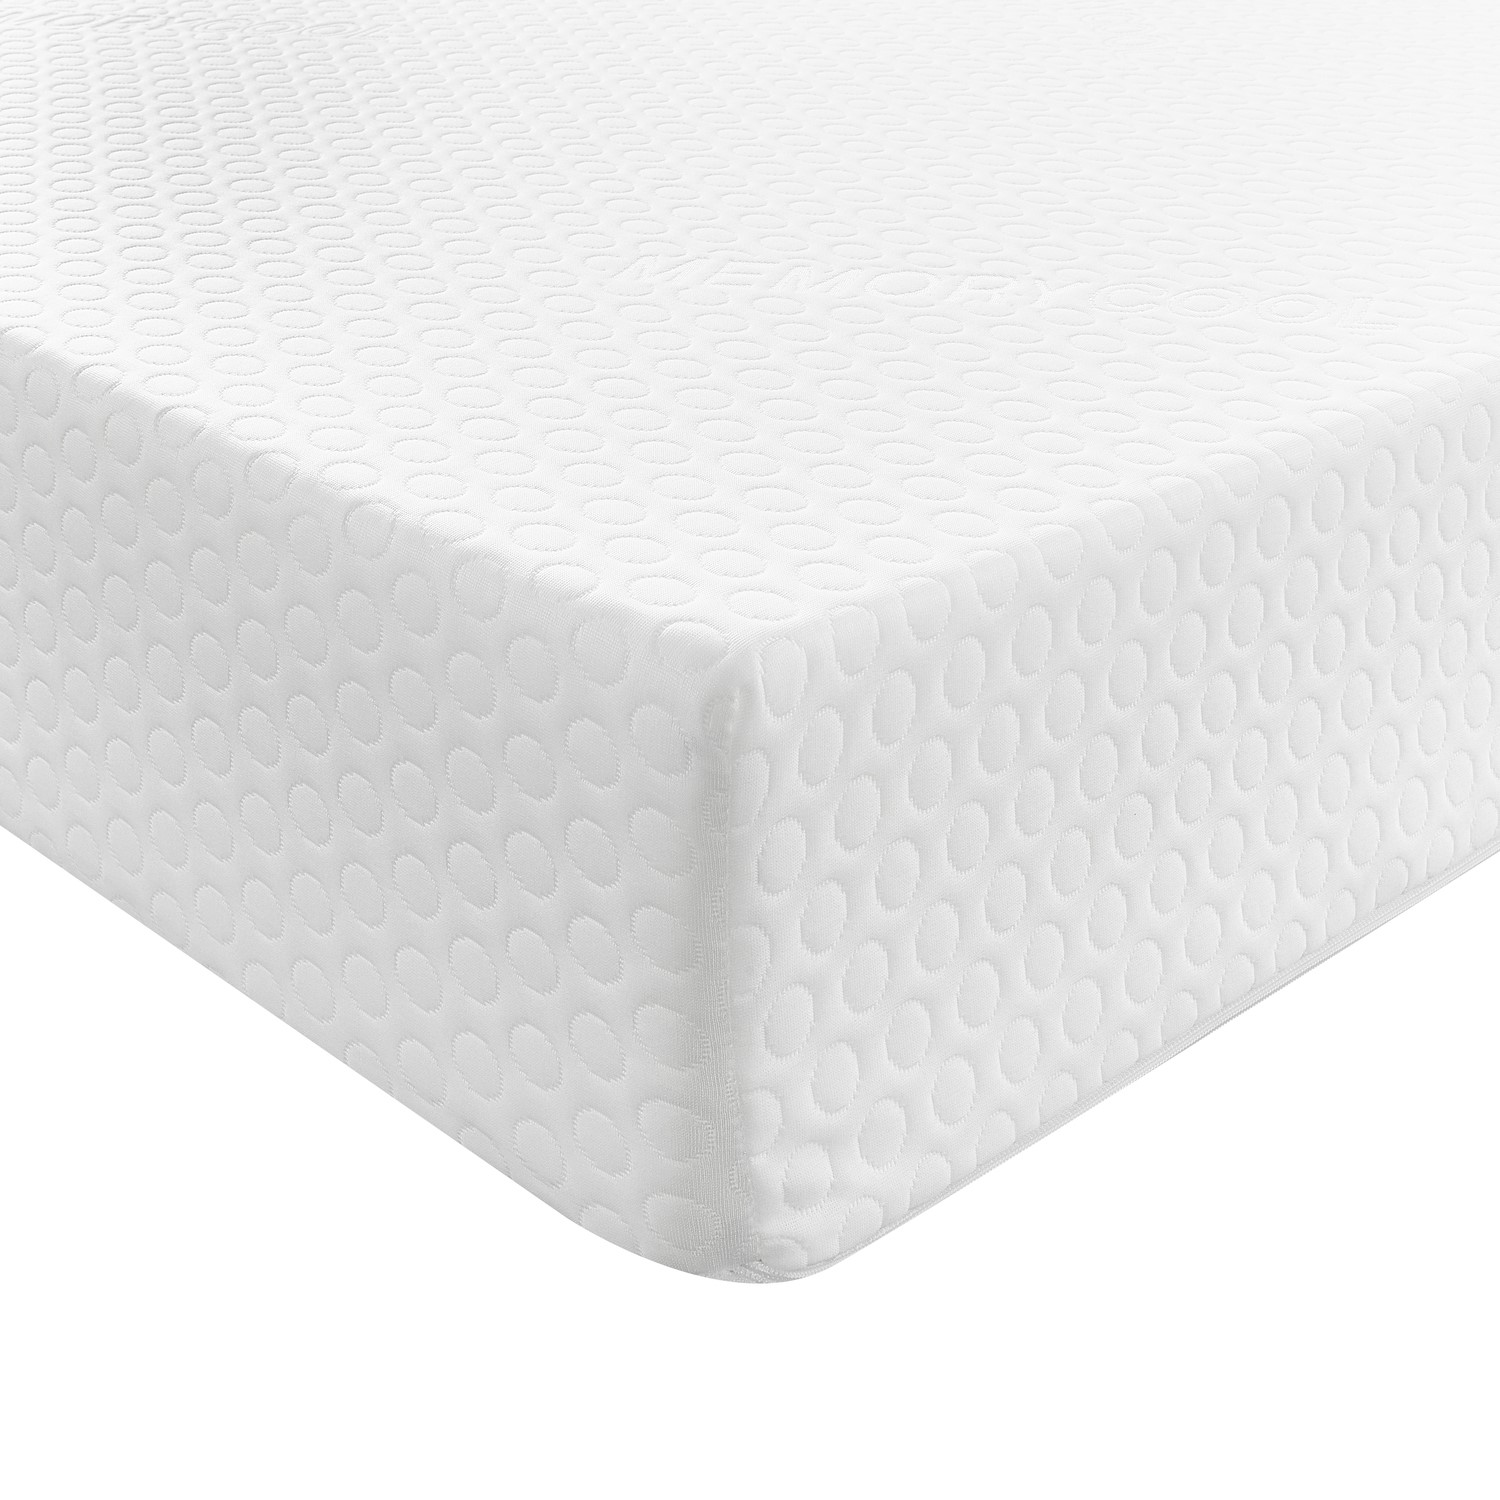 Photo of Small double memory foam rolled hypoallergenic mattress with removable cover - aspire